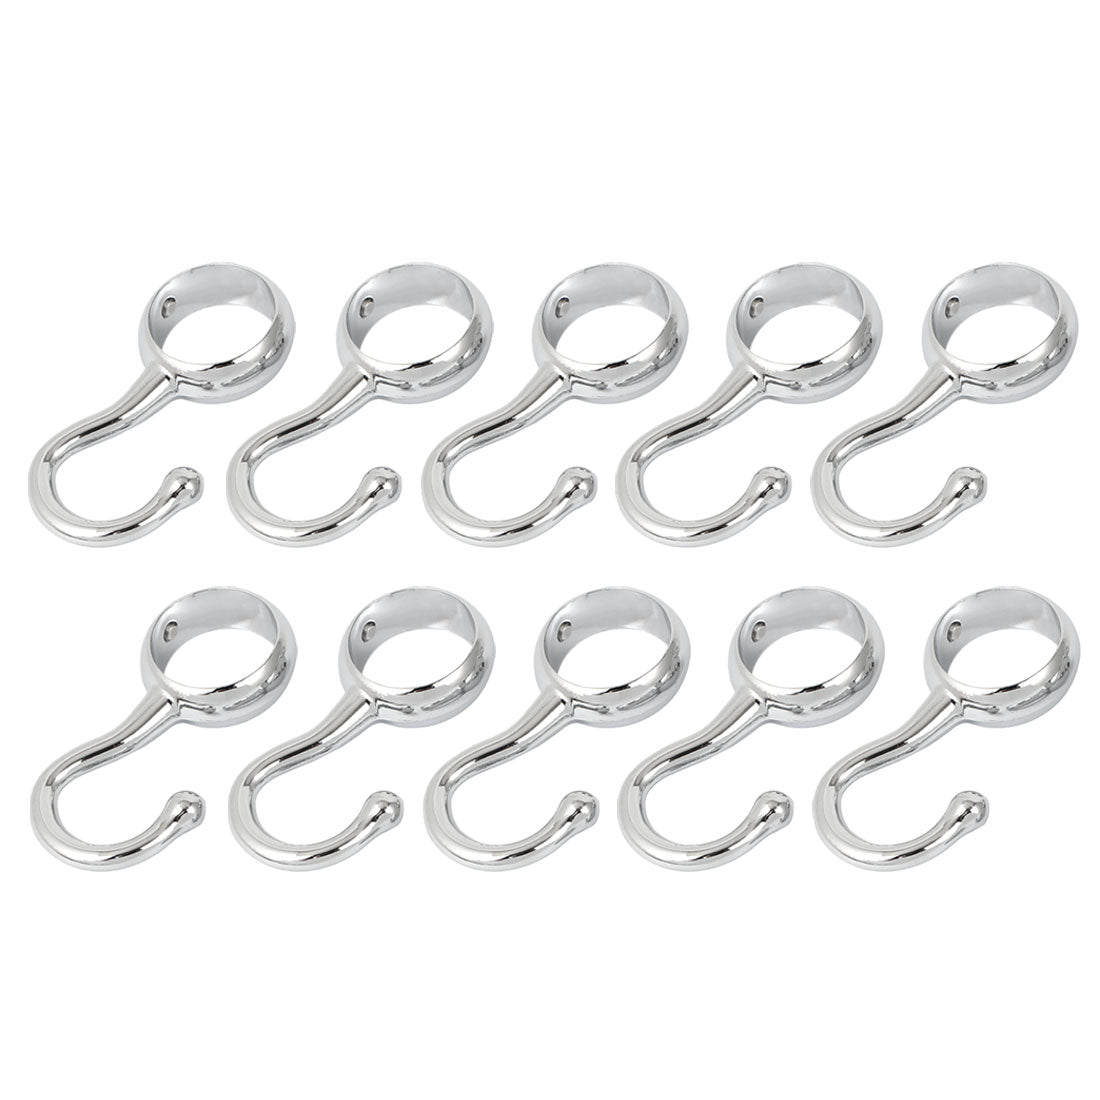 uxcell Uxcell 25mm Dia Round Tube Wardrobe Hanging Clothes Garment Rail Hanger Hook 10pcs